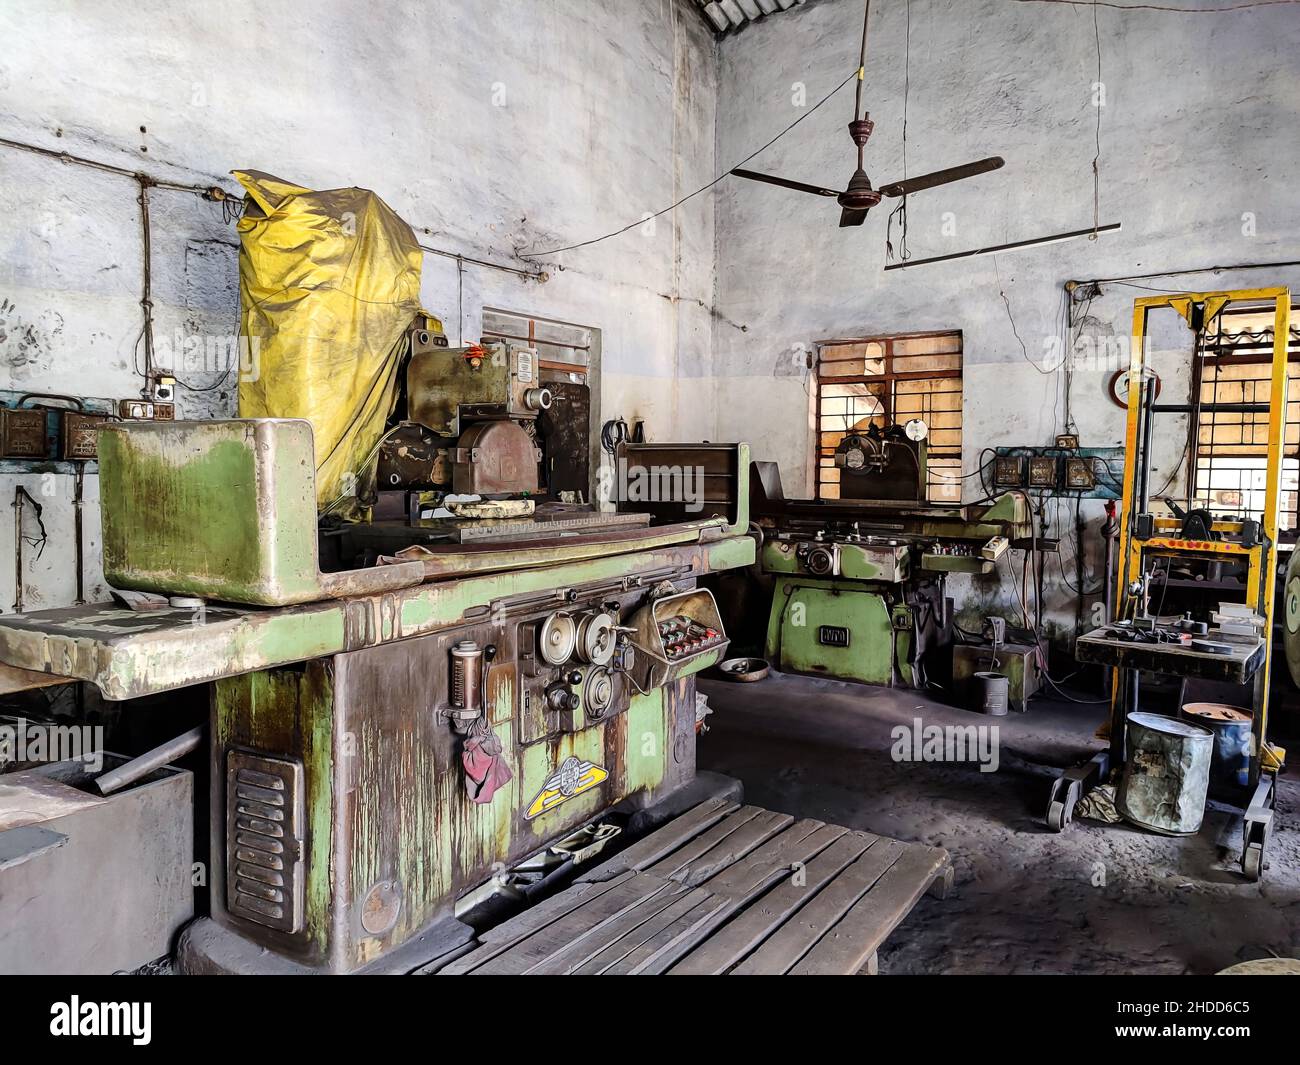 Kolhapur, Maharashtra,India- November 26th 2021; Stock photo of industrial factory interior with grinding surface machine ,other equipments and object Stock Photo